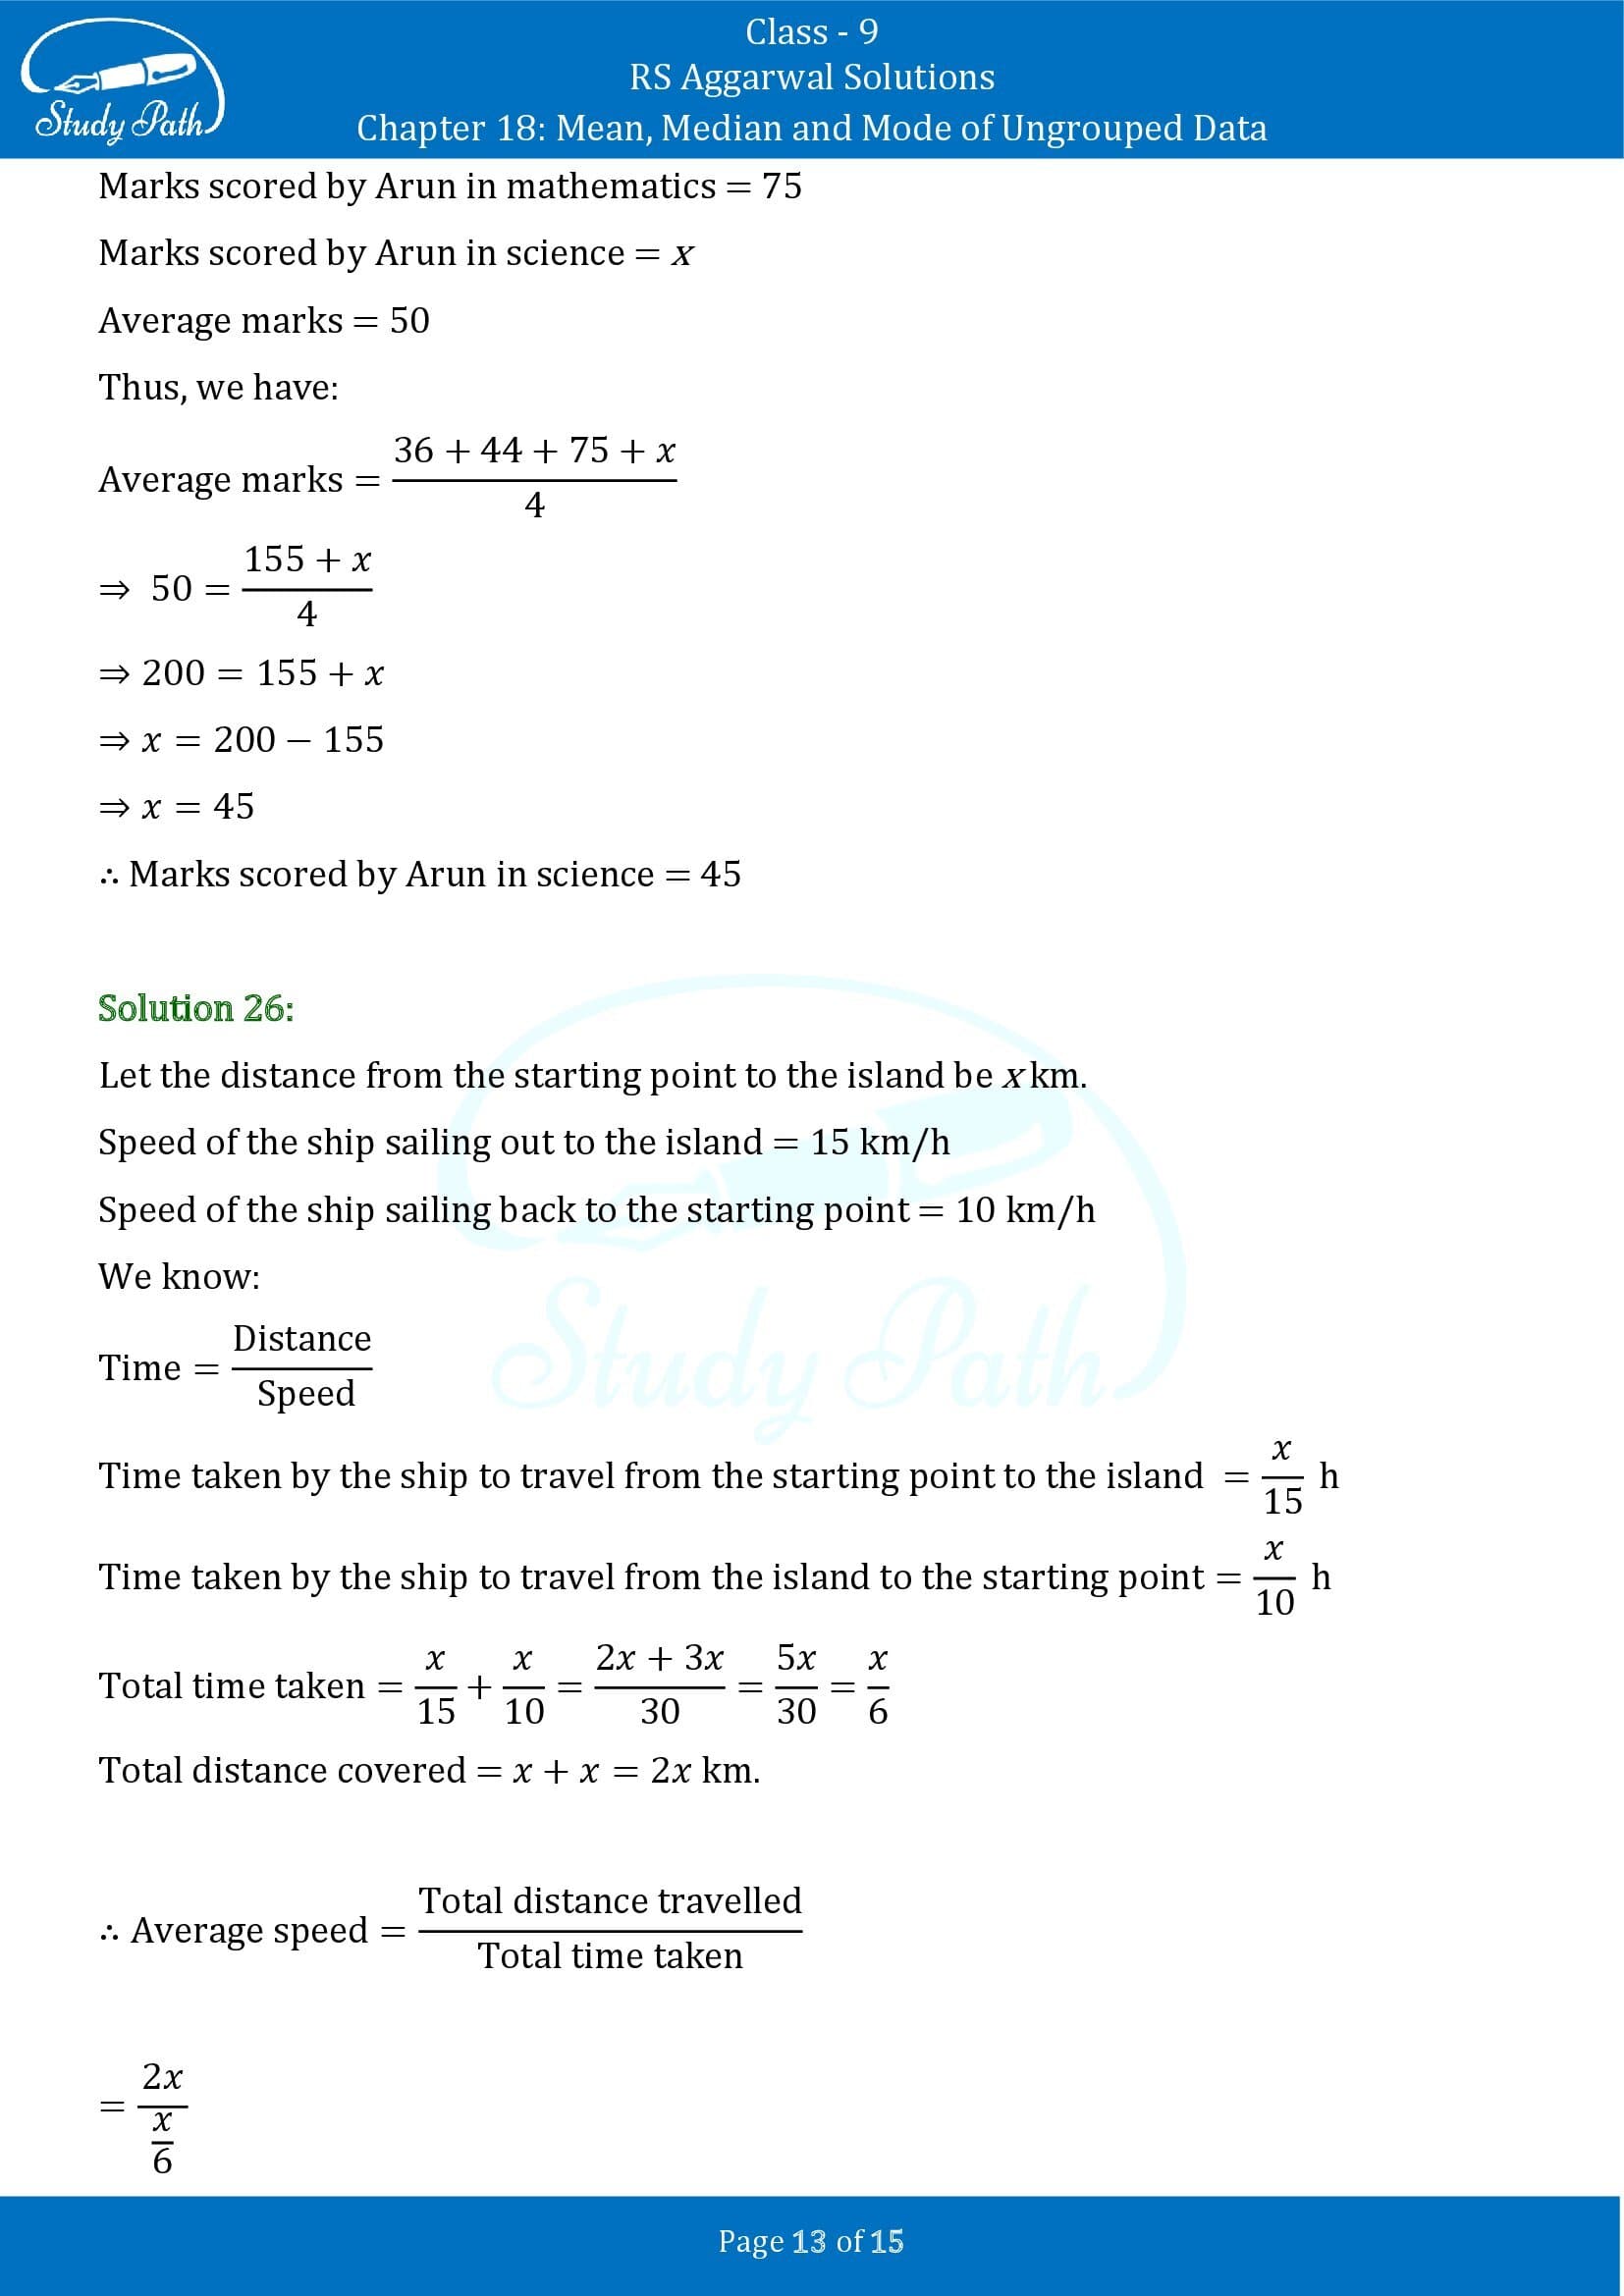 RS Aggarwal Solutions Class 9 Chapter 18 Mean Median and Mode of Ungrouped Data Exercise 18A 00013